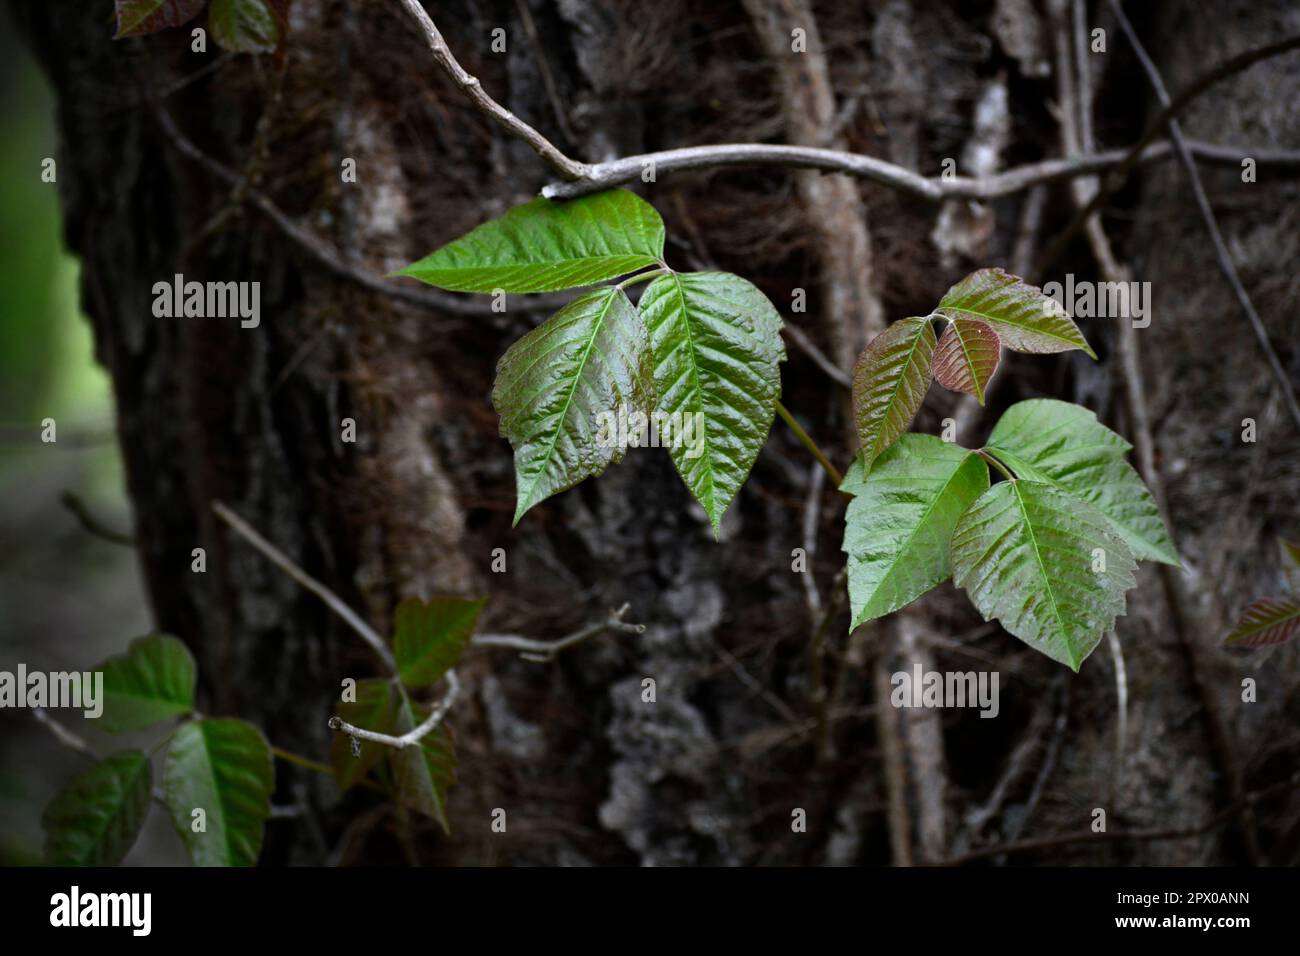 Poison ivy (Toxicodendron radicans) vines grow on a tree in Virginia, USA. Stock Photo